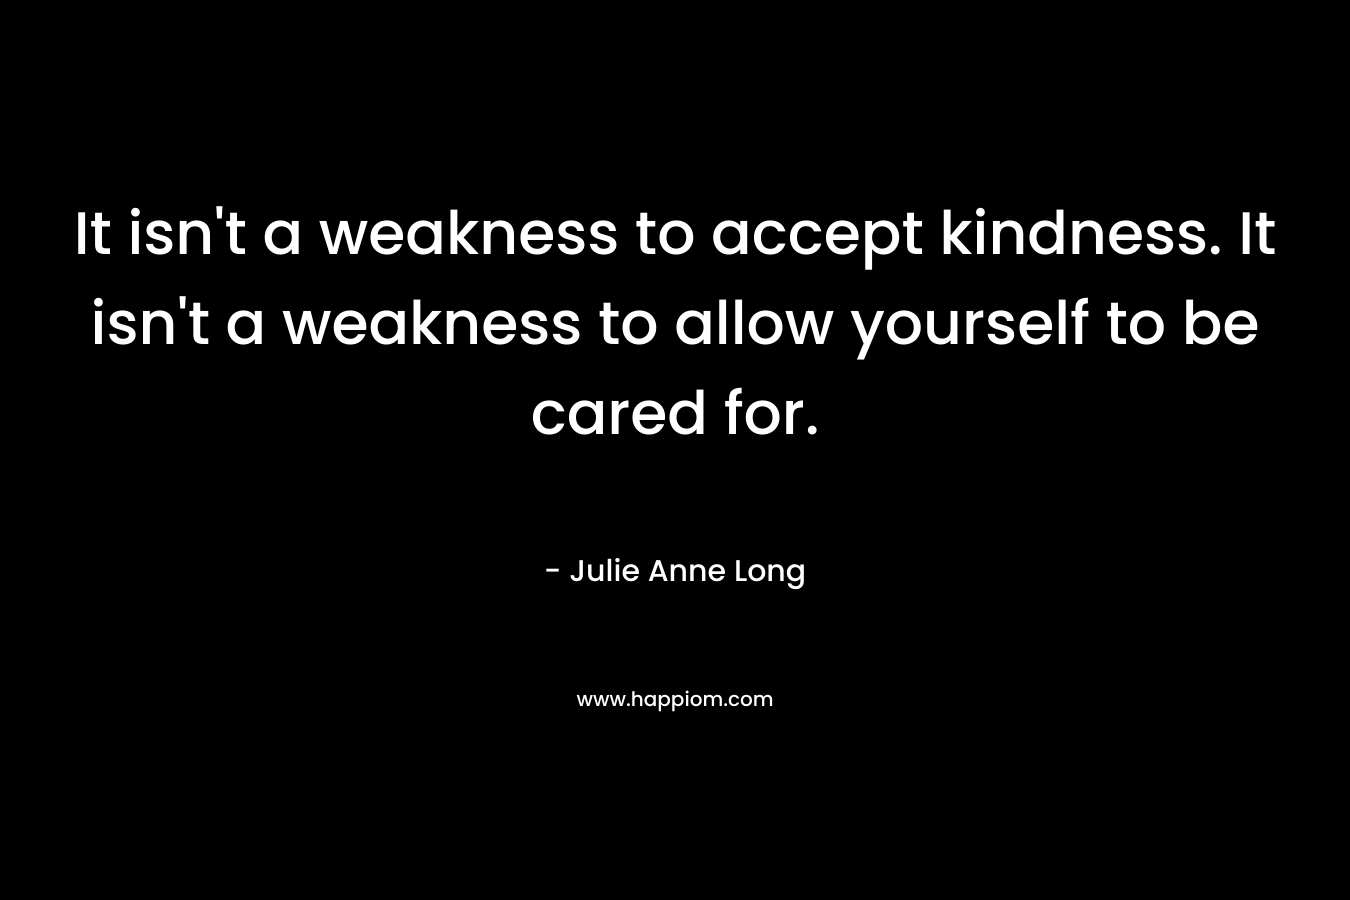 It isn't a weakness to accept kindness. It isn't a weakness to allow yourself to be cared for.